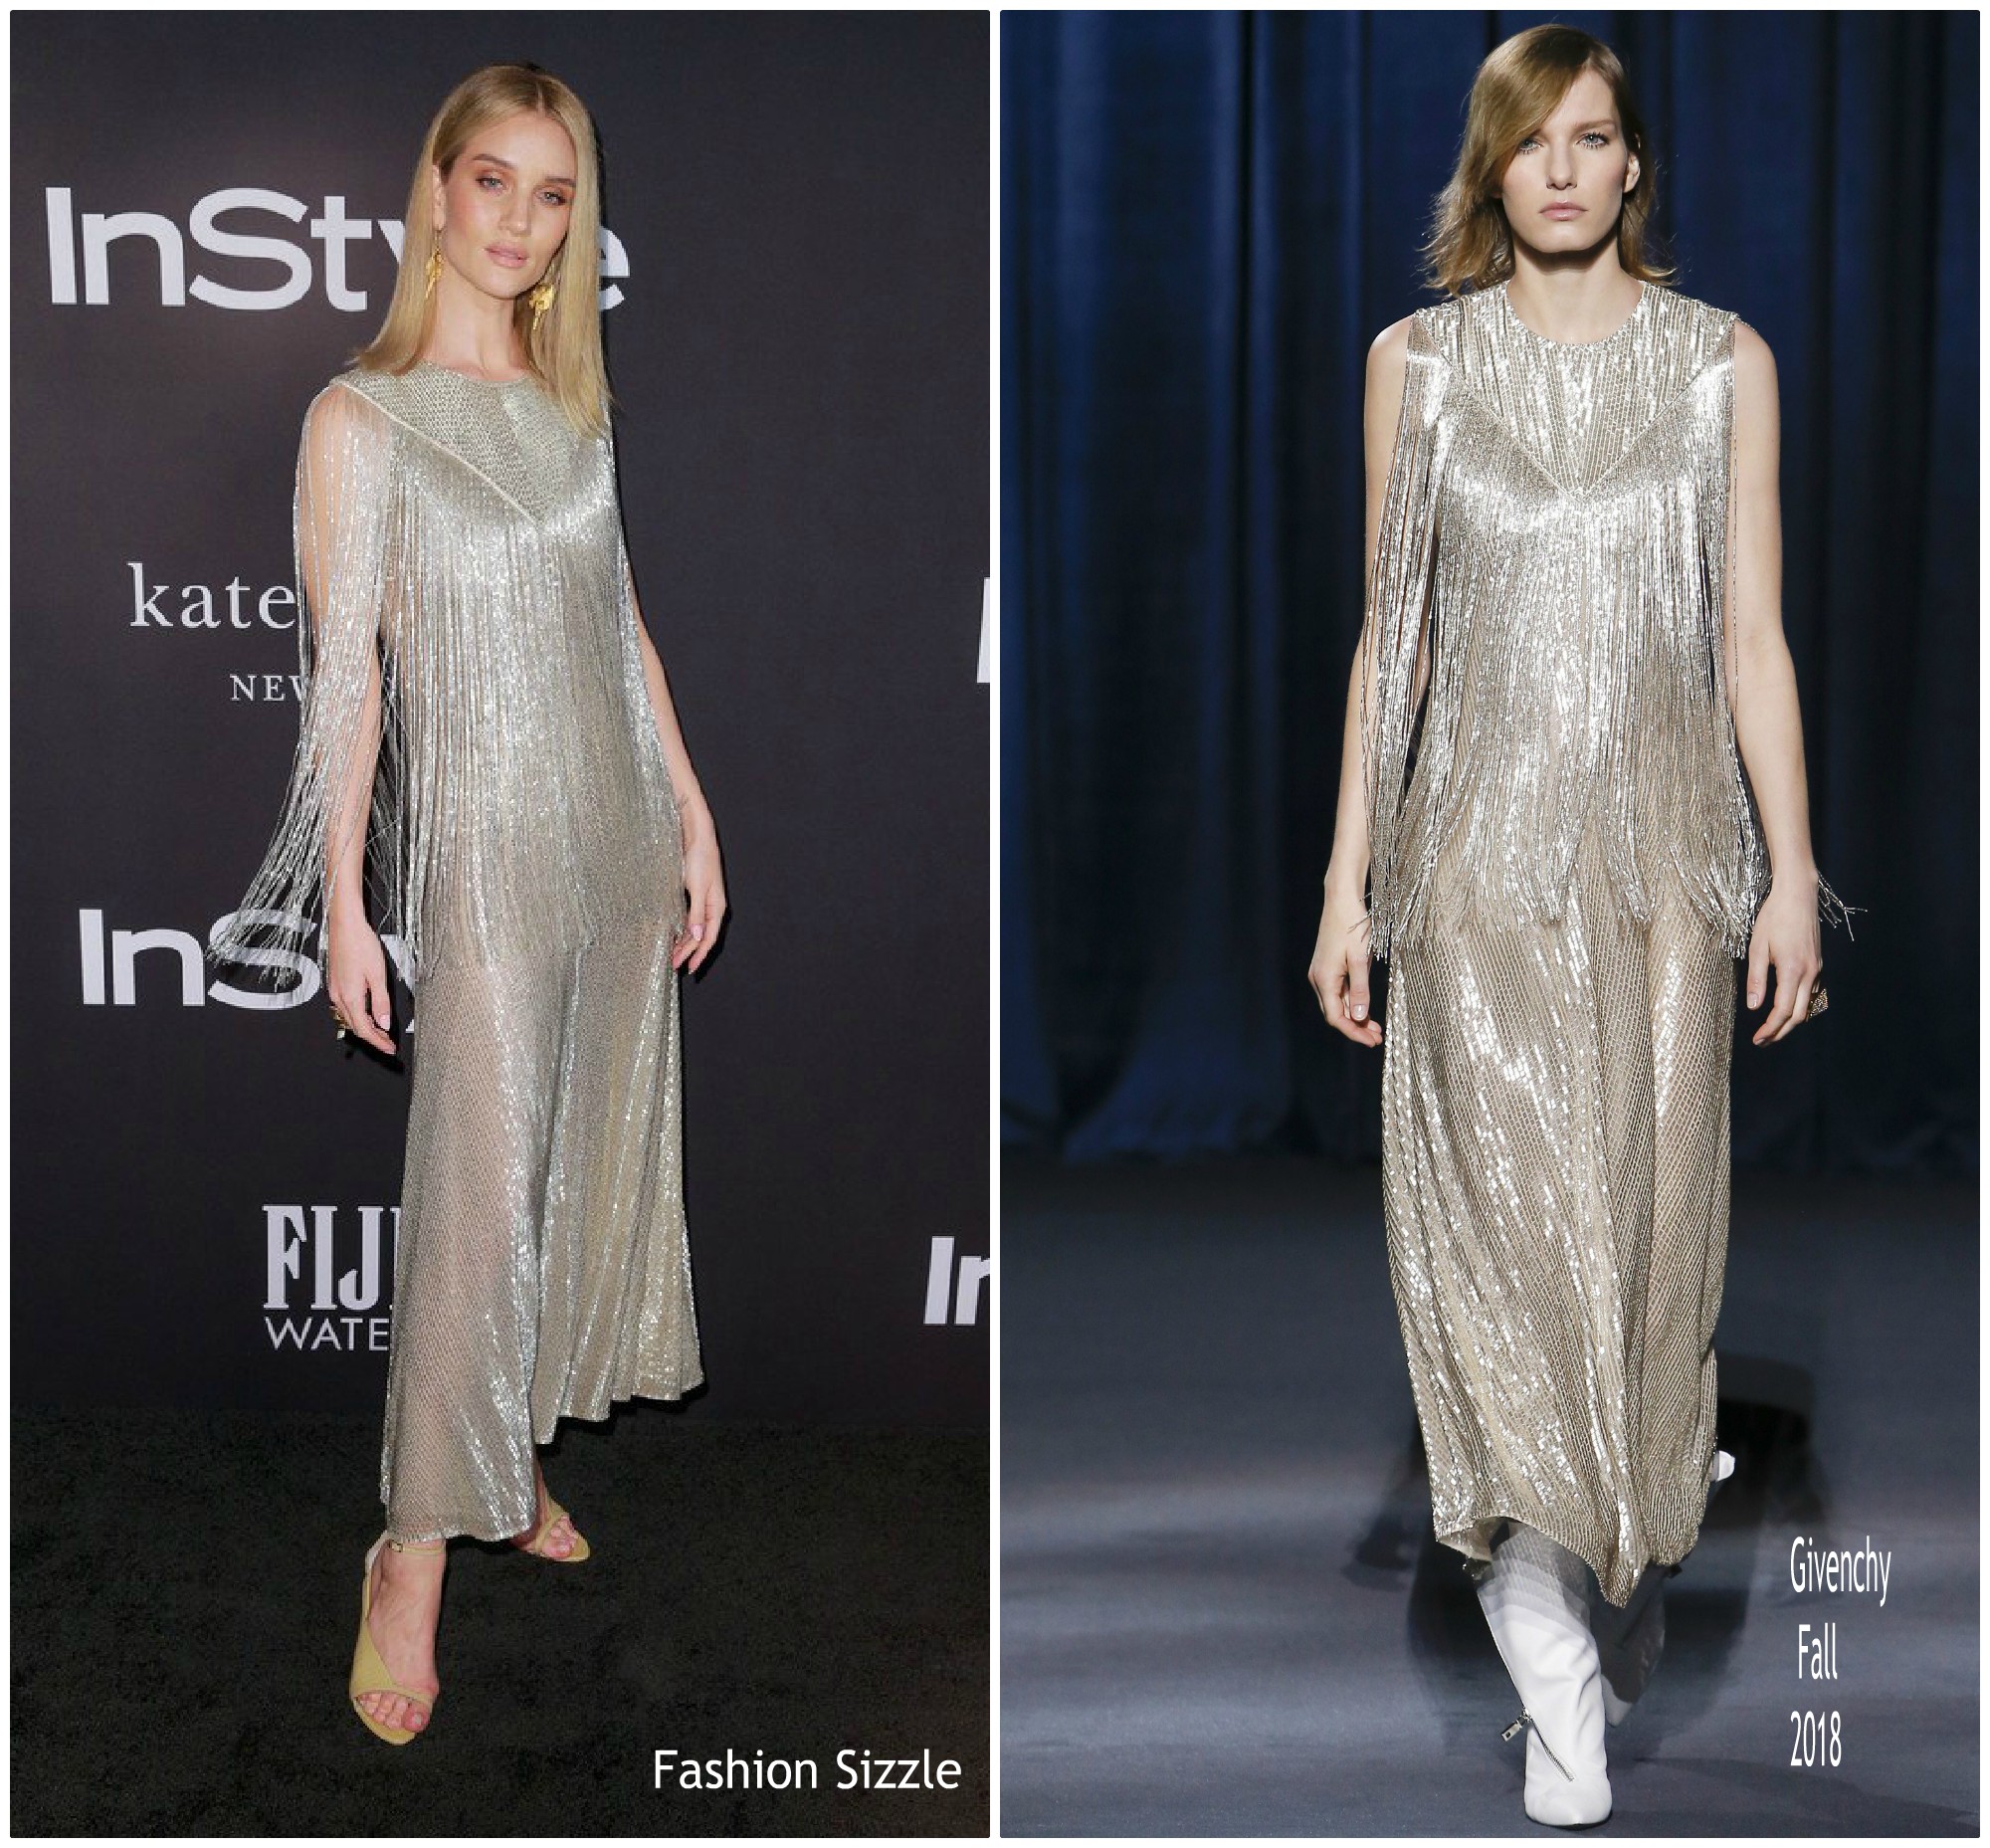 rosie-huntington-whiteley-in-givenchy-2018-instyle-awards